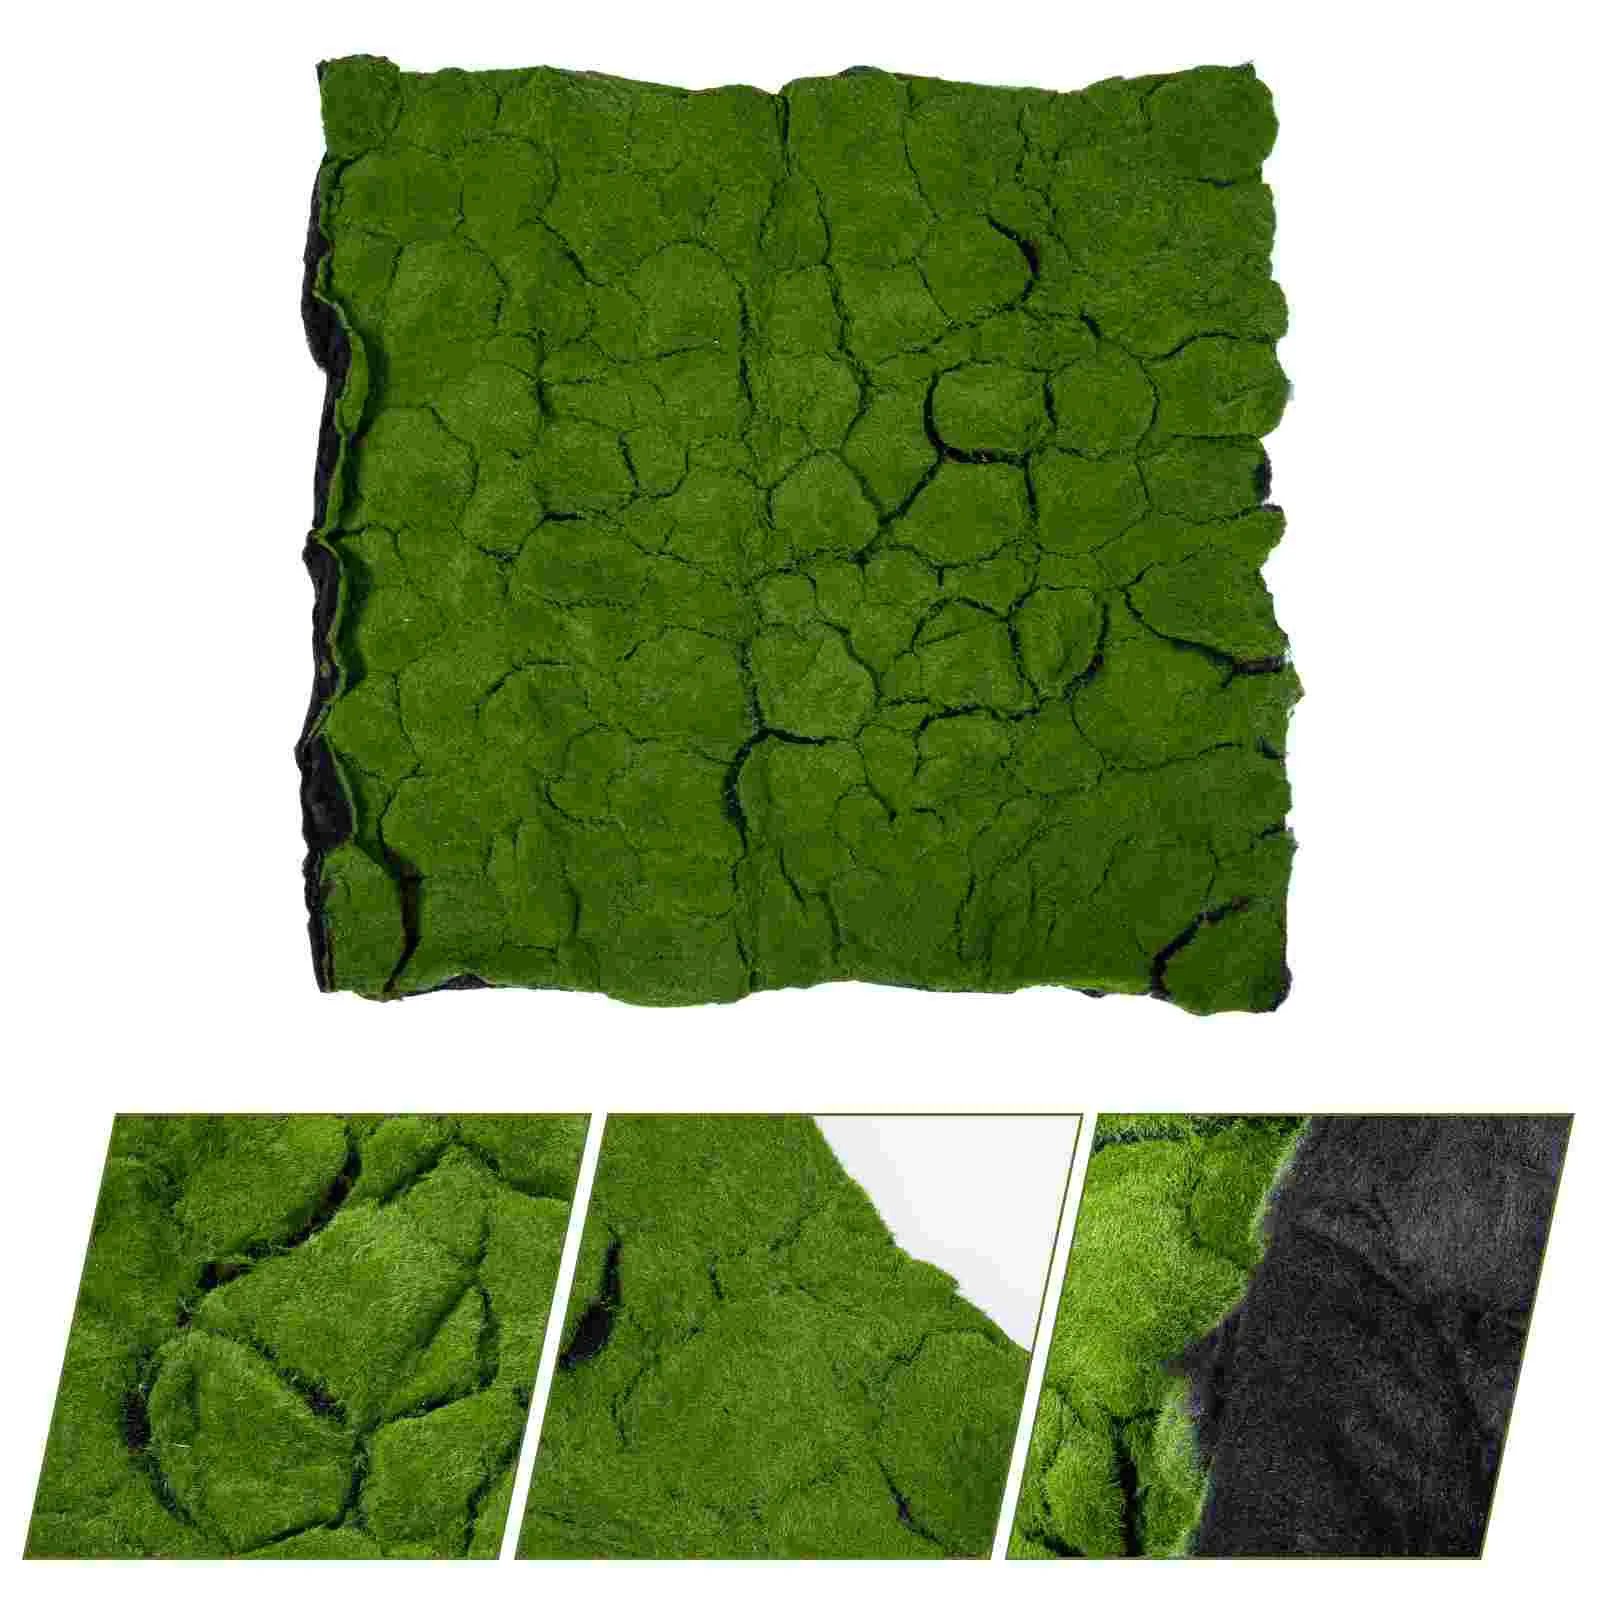 

Simulated Moss Lawn Astetic Room Decor Simulation Turf Artificial Grass Mat Rug Planted Cotton Fake Garden Carpet Pad